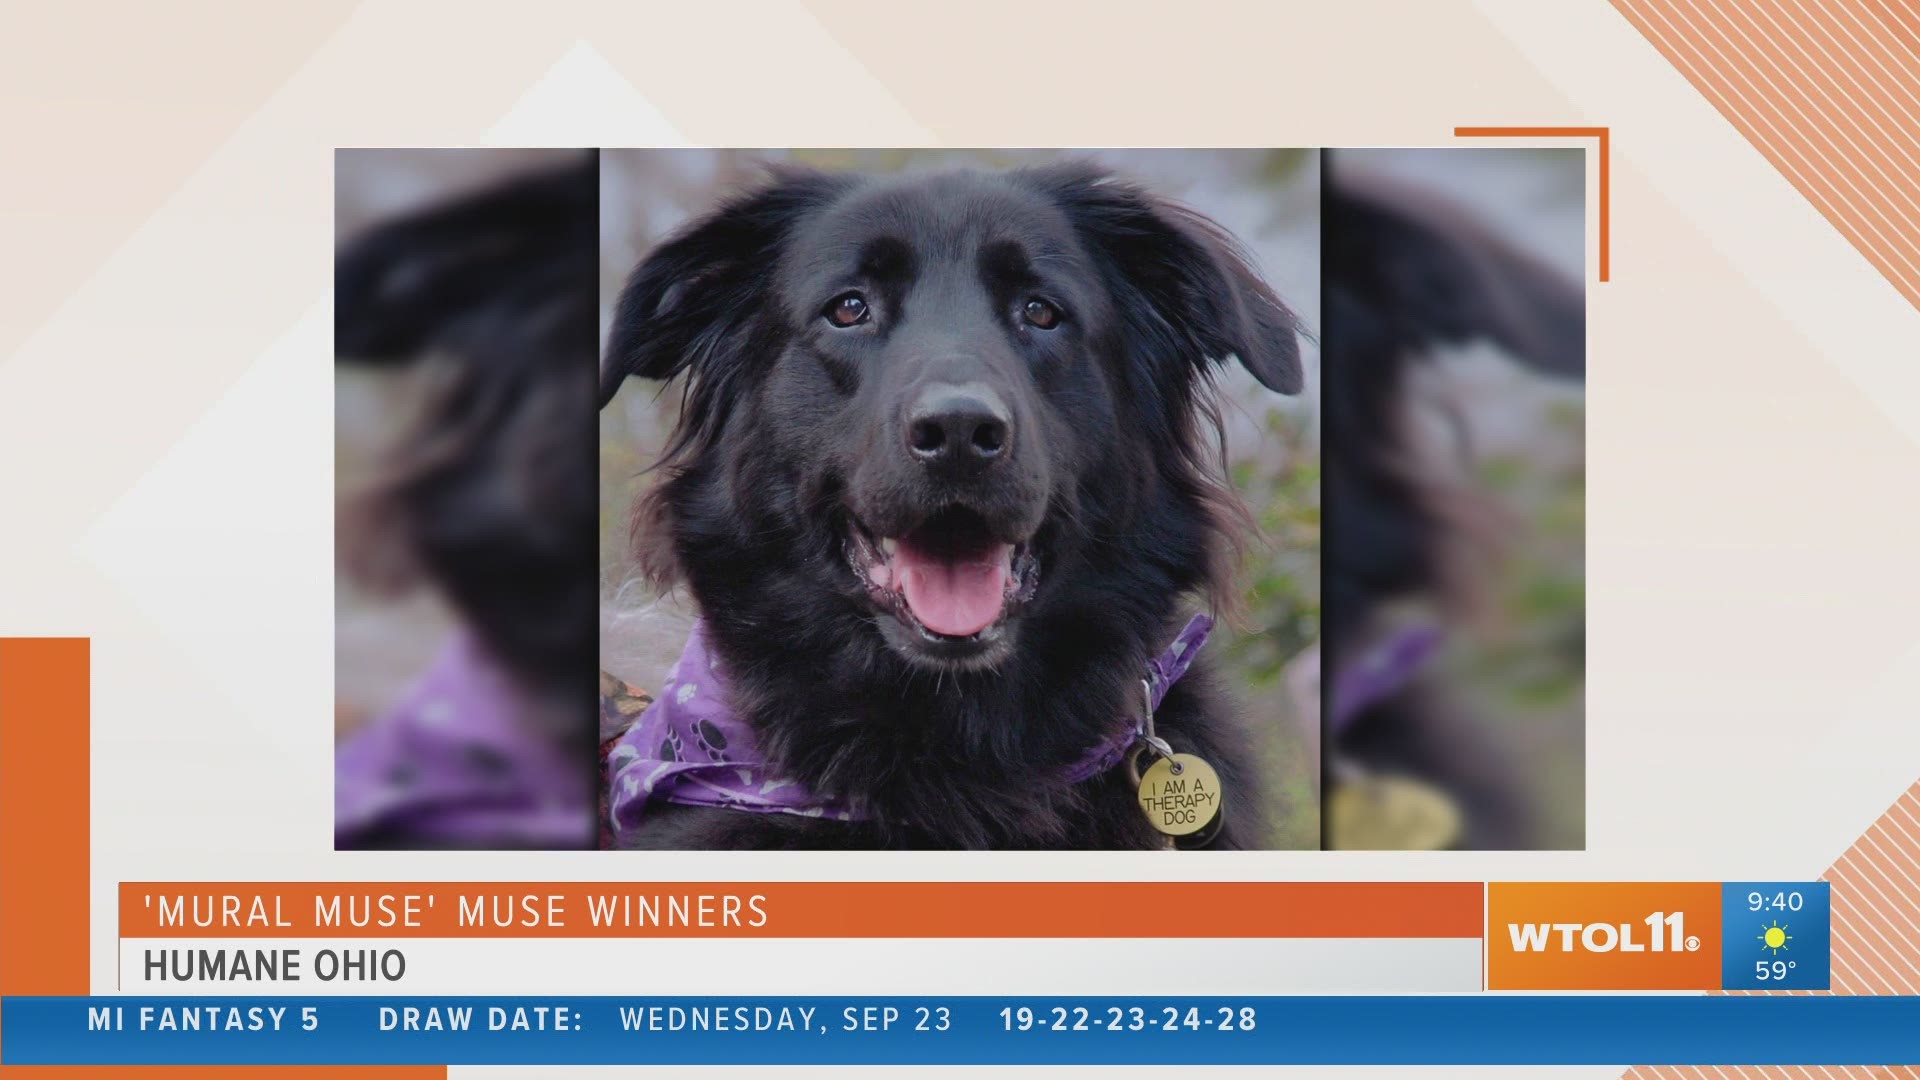 Humane Ohio announces their "mural muse" winners, and says they have plenty of animals looking for their forever home!